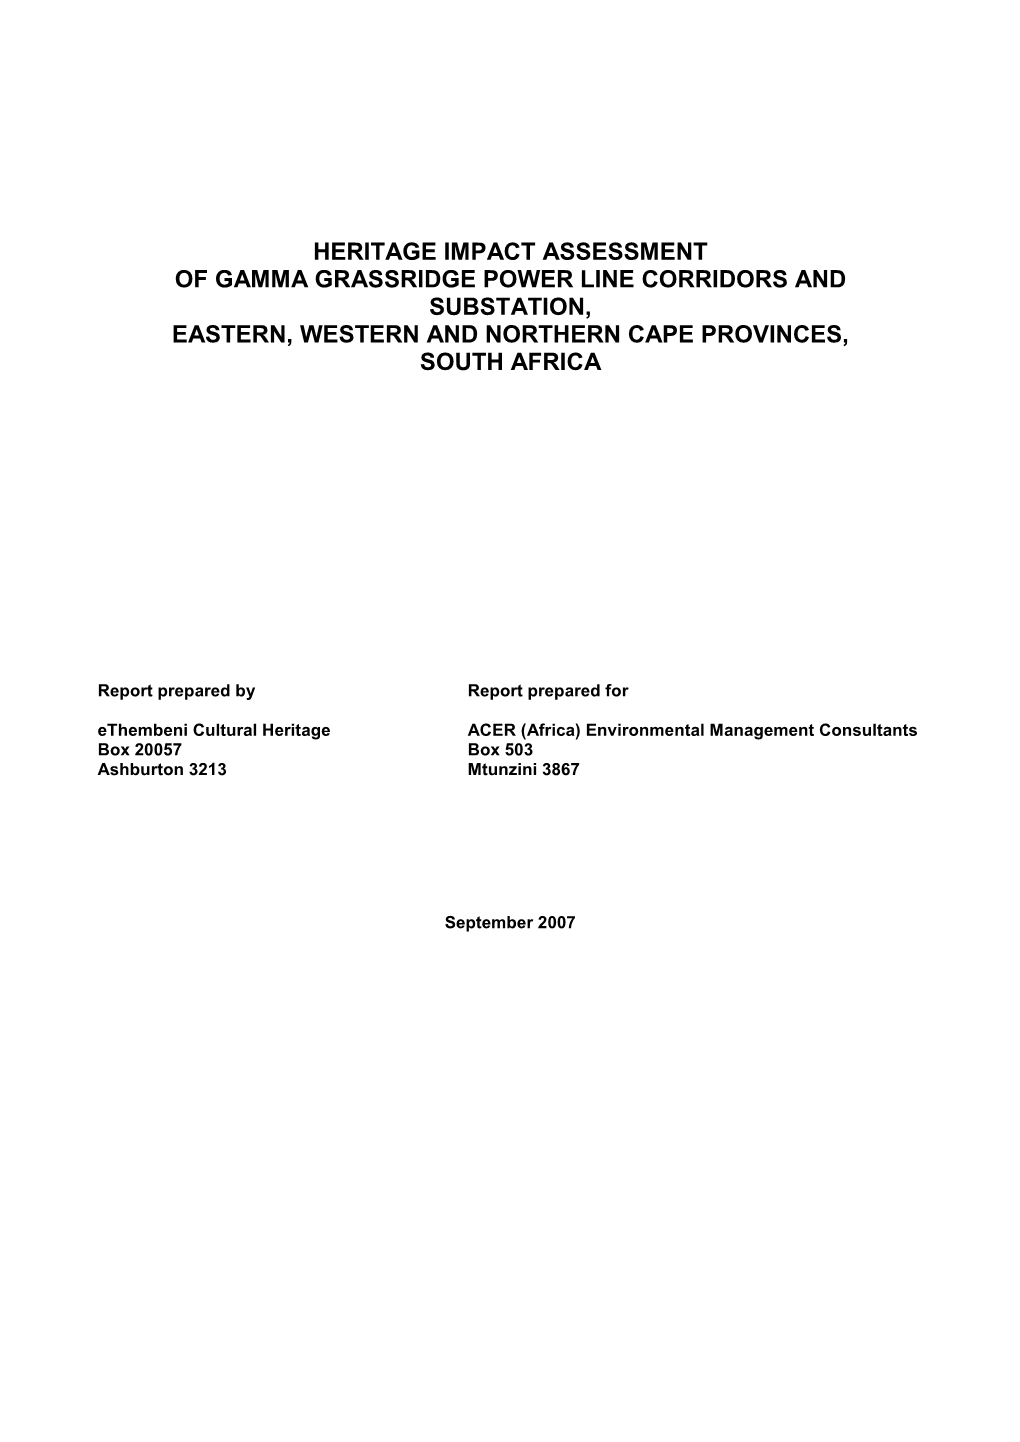 Heritage Impact Assessment of Gamma Grassridge Power Line Corridors and Substation, Eastern, Western and Northern Cape Provinces, South Africa